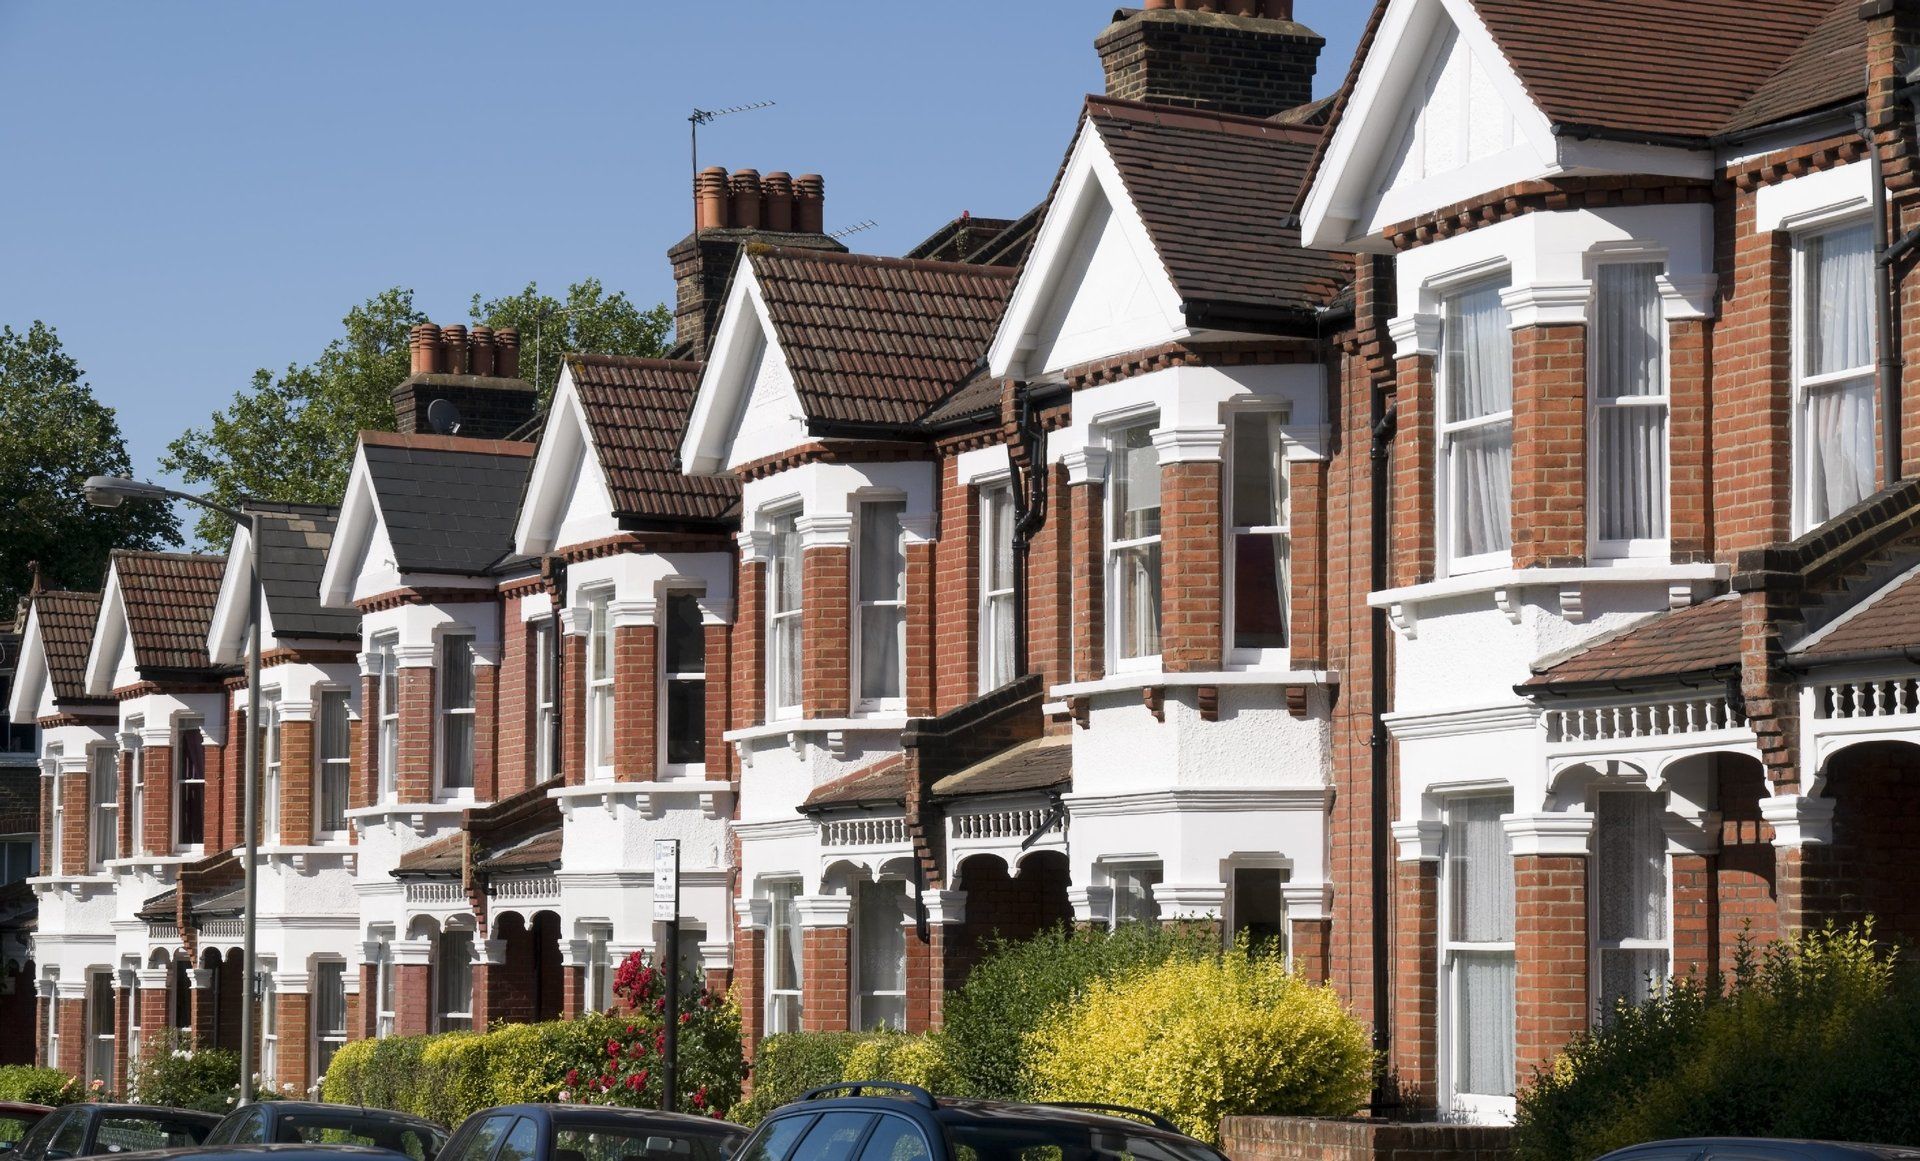 Tax services for investors in UK property